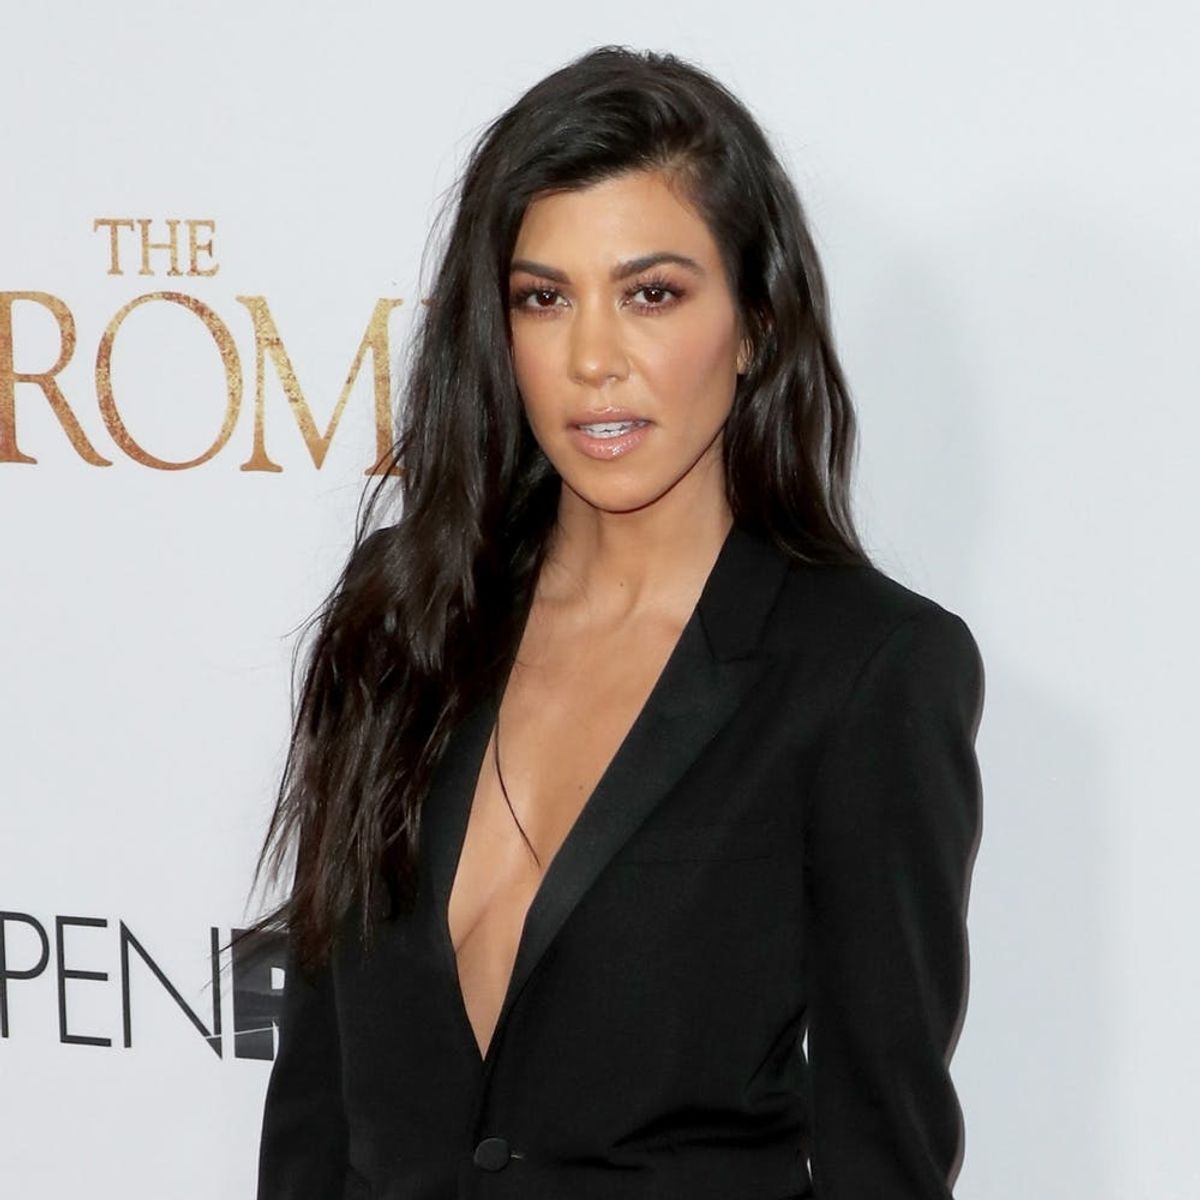 Kourtney Kardashian Has Finally Gotten Her Wish to Have *This* Stat About Herself Changed on Wikipedia